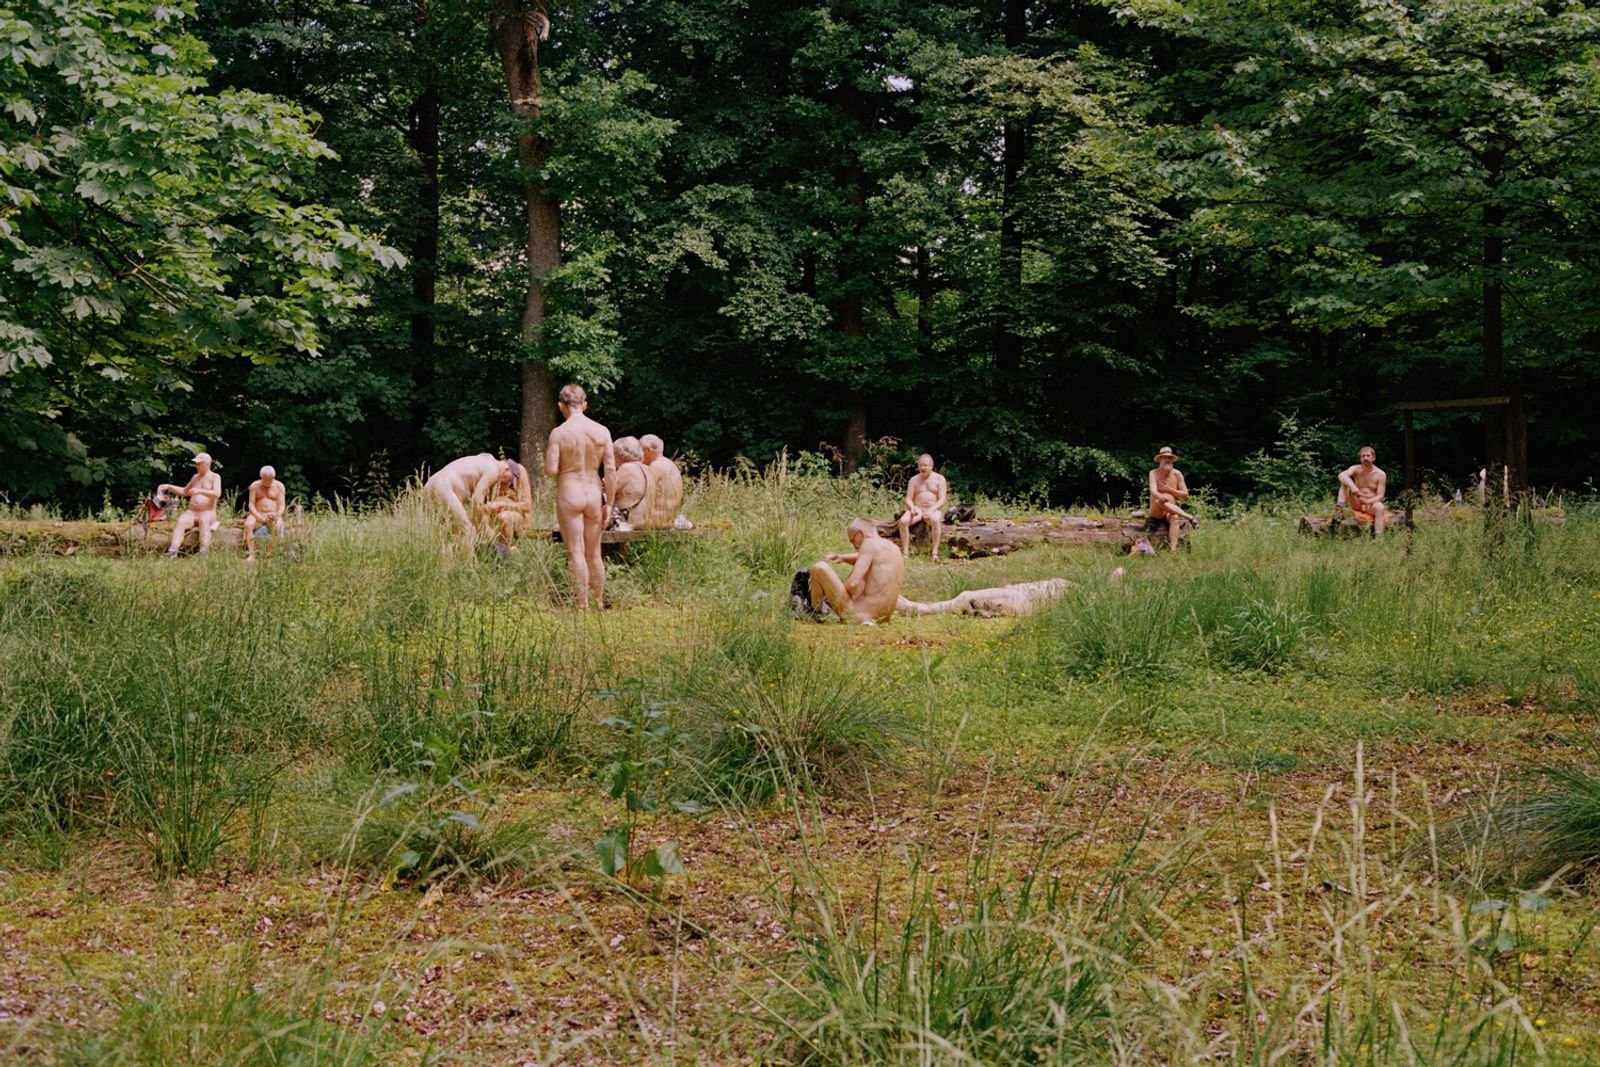 © Julia Gaes - Image from the The Naturists photography project